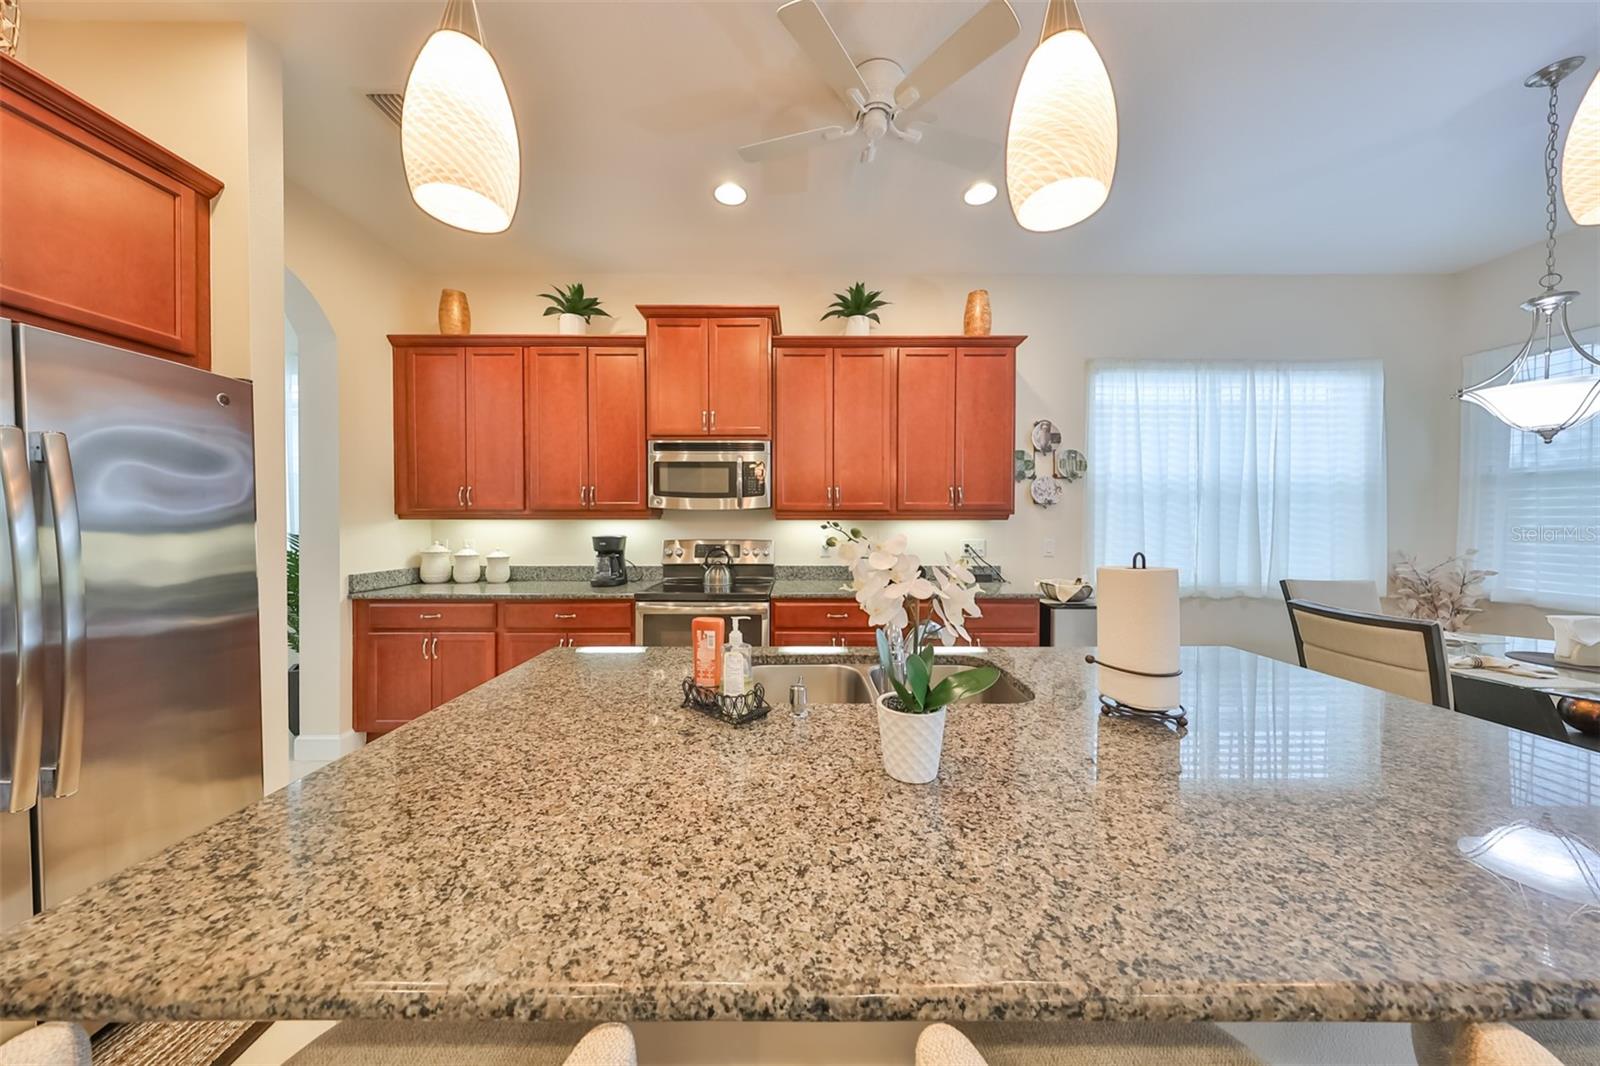 A beautiful and functional breakfast bar with lots of granite countertops for any task, custom pendant lighting and newer stainless-steel appliances.